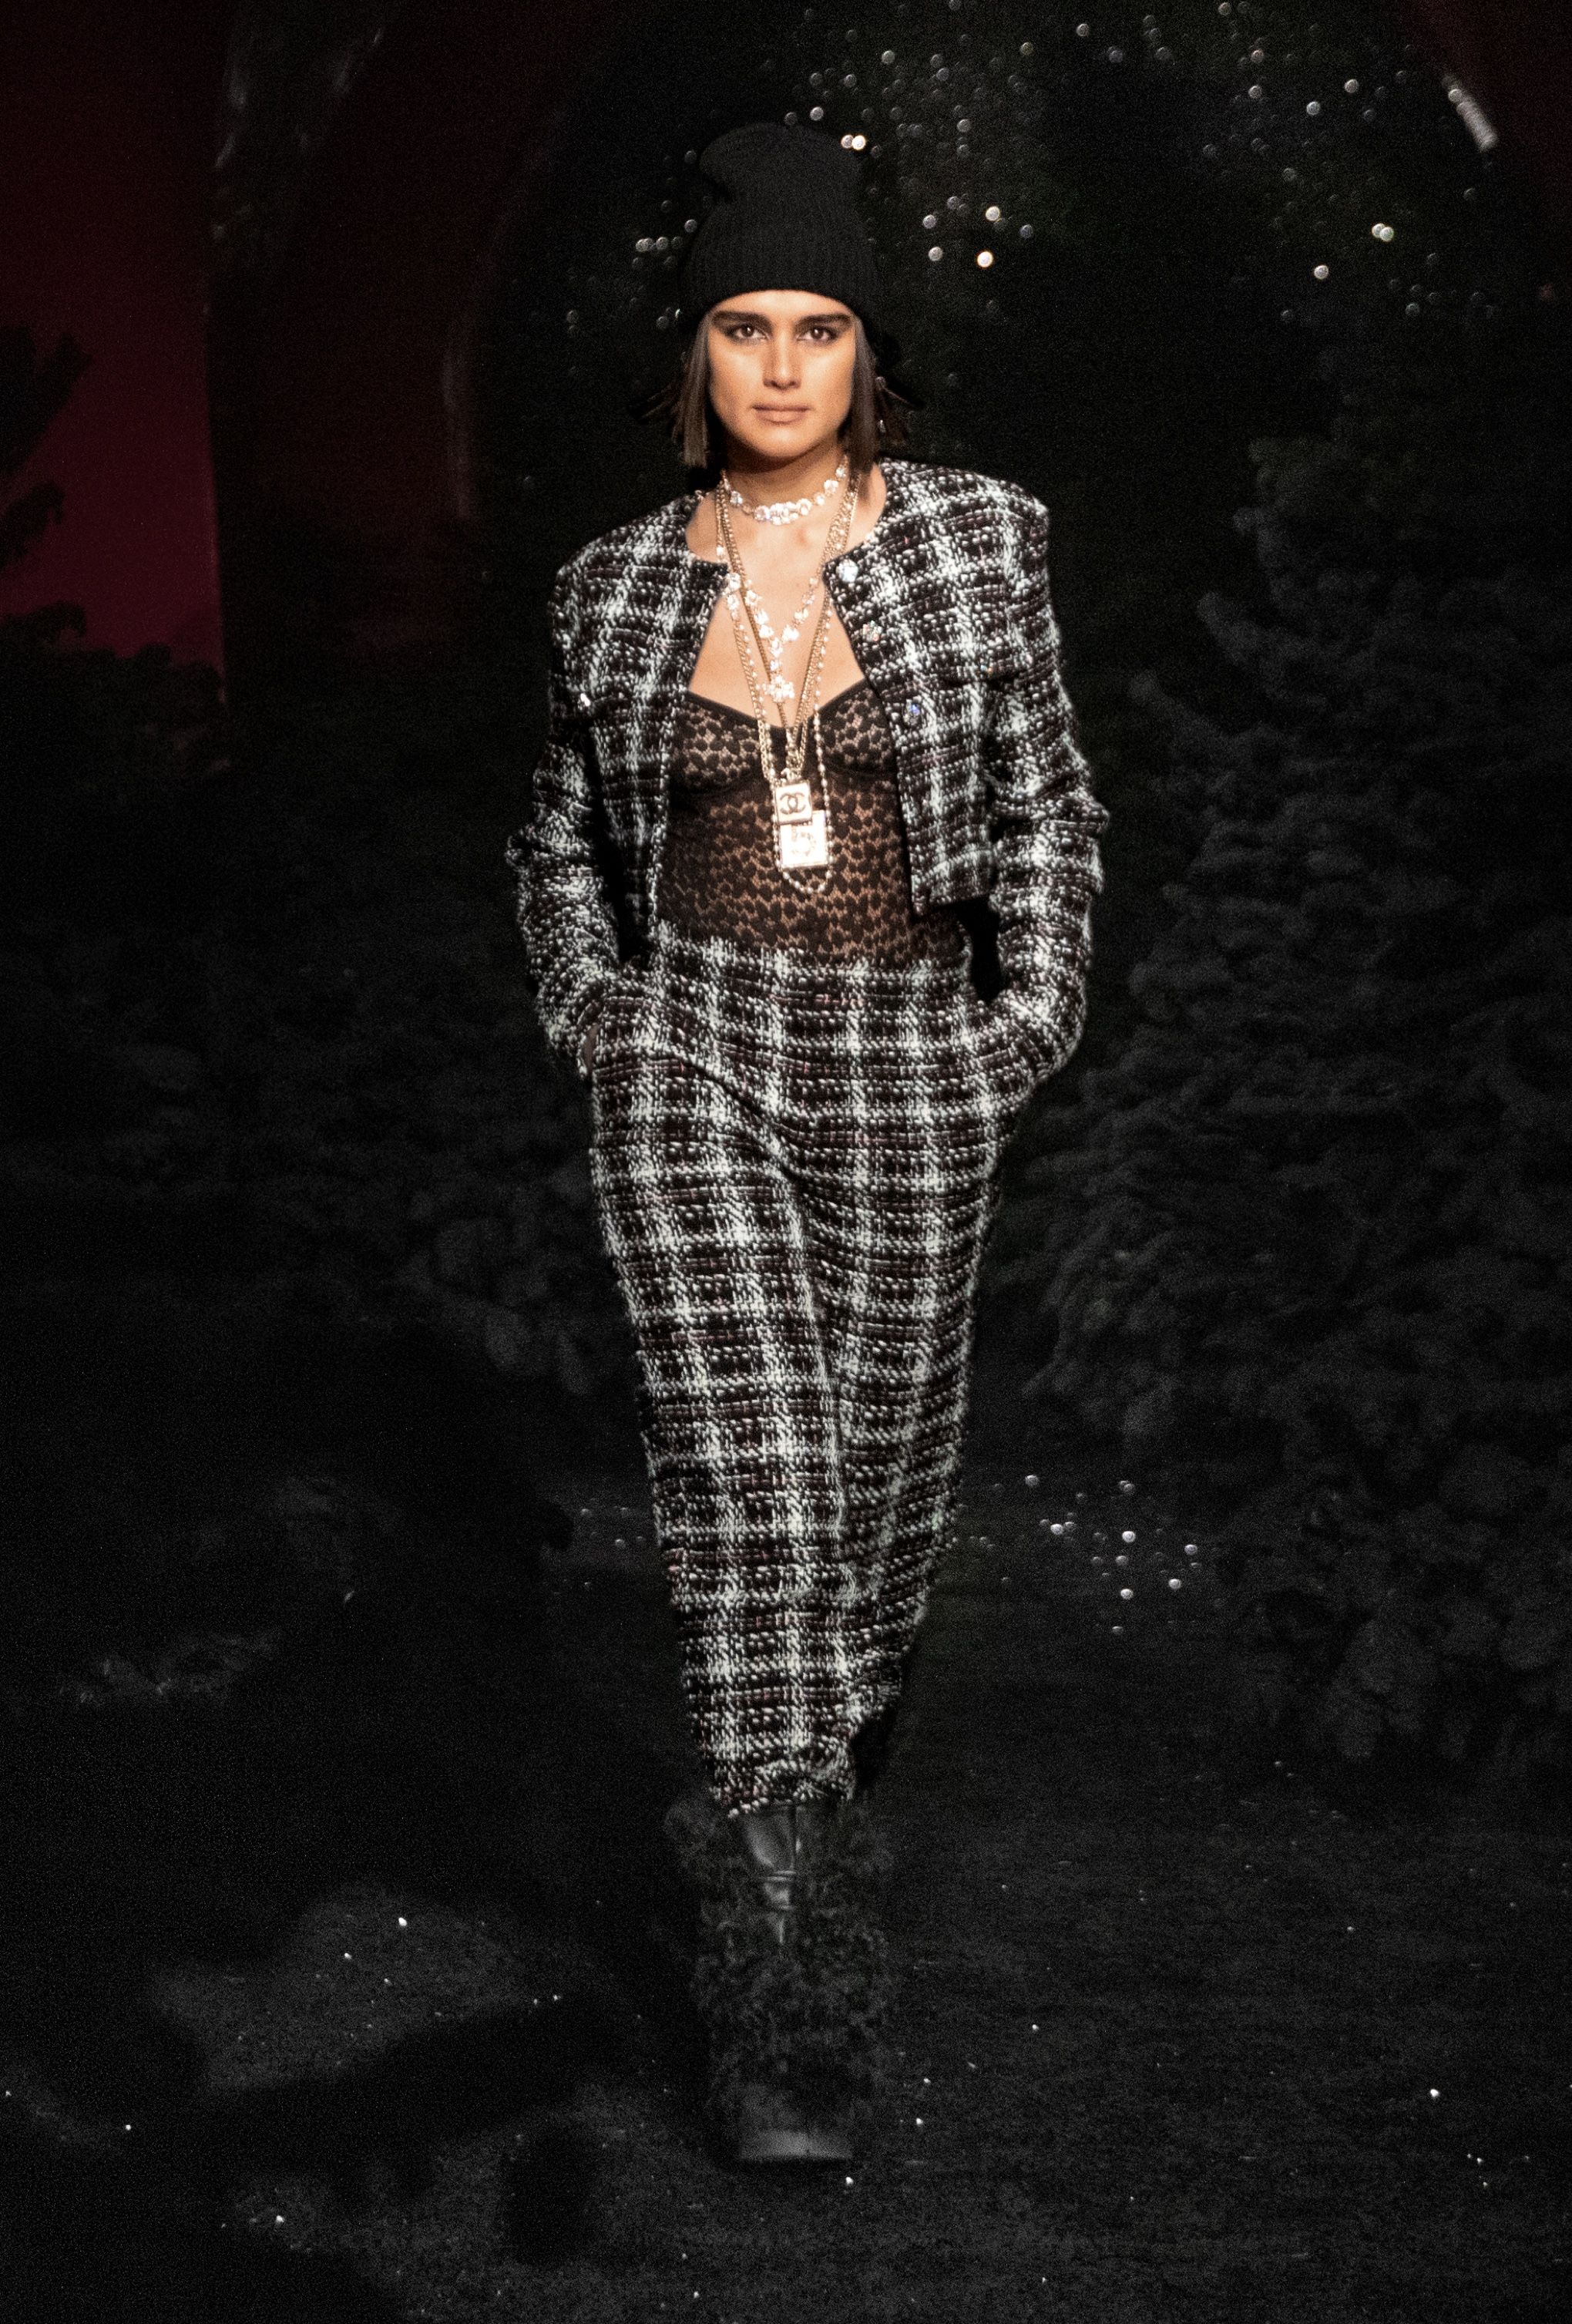 FASHION WEEK FAVES – PRE-FALL 2021 – CHANEL - brunettes have more fun